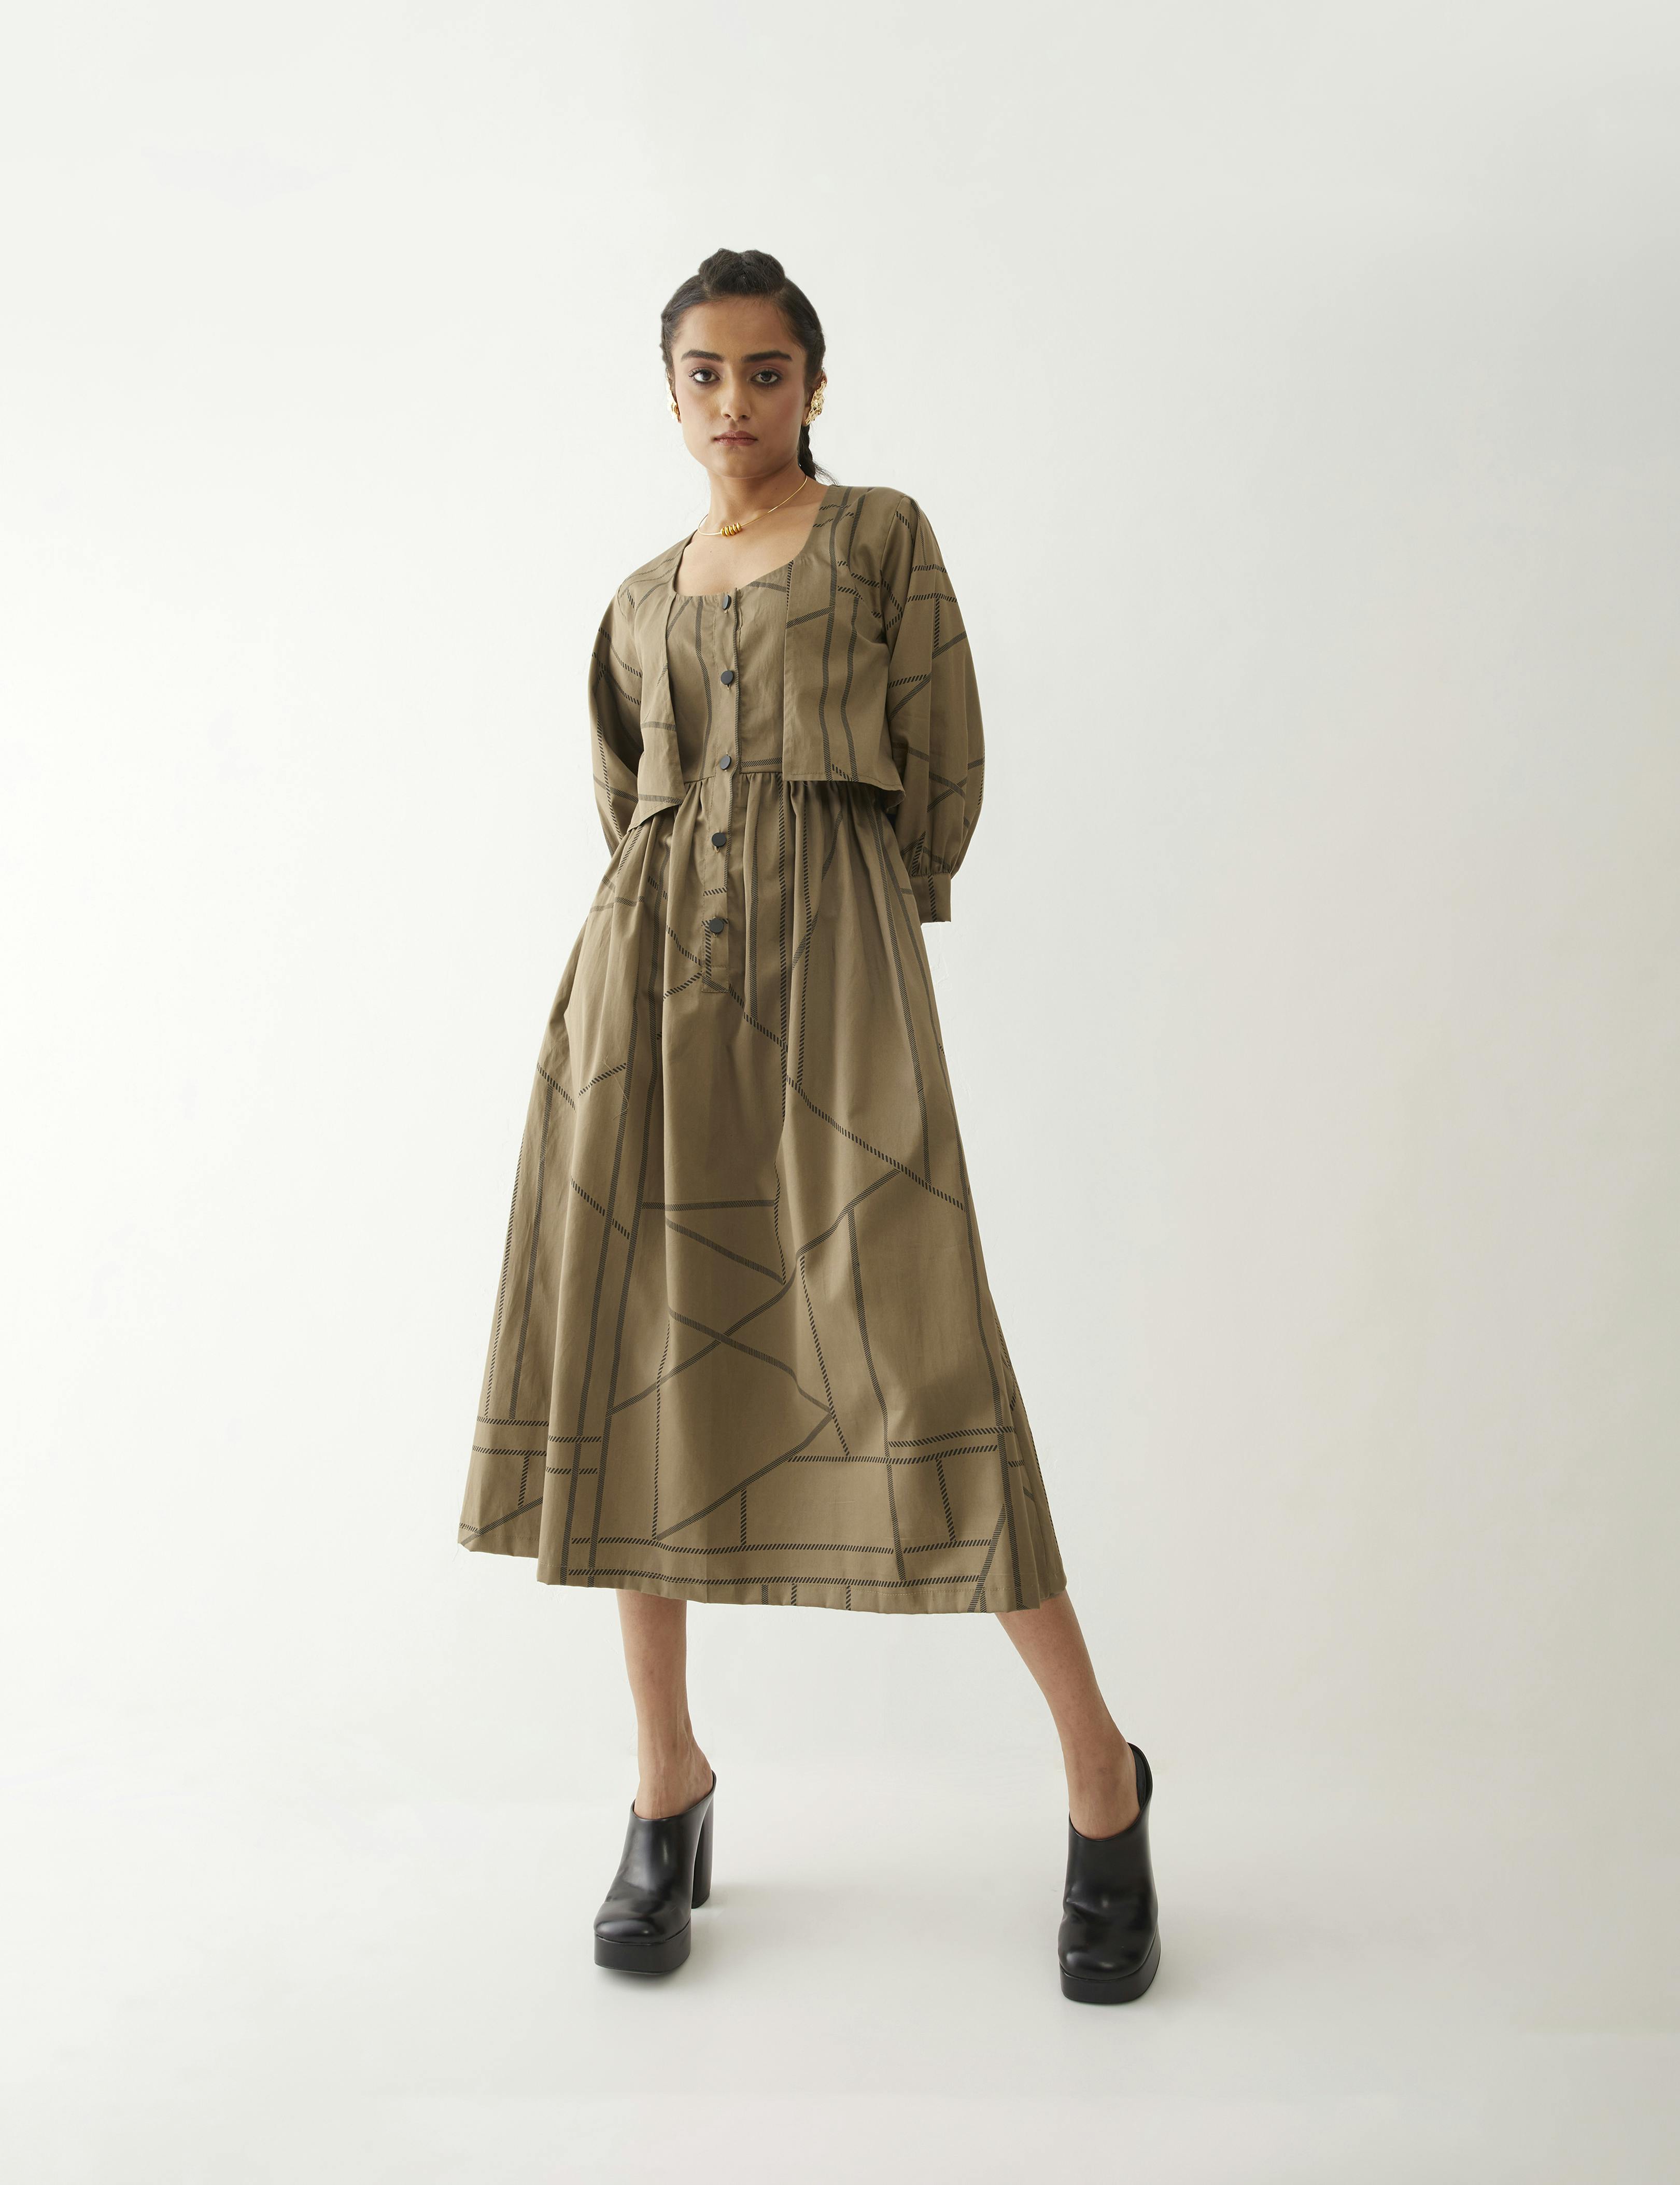 BONOBO Dress, a product by Son of a Noble